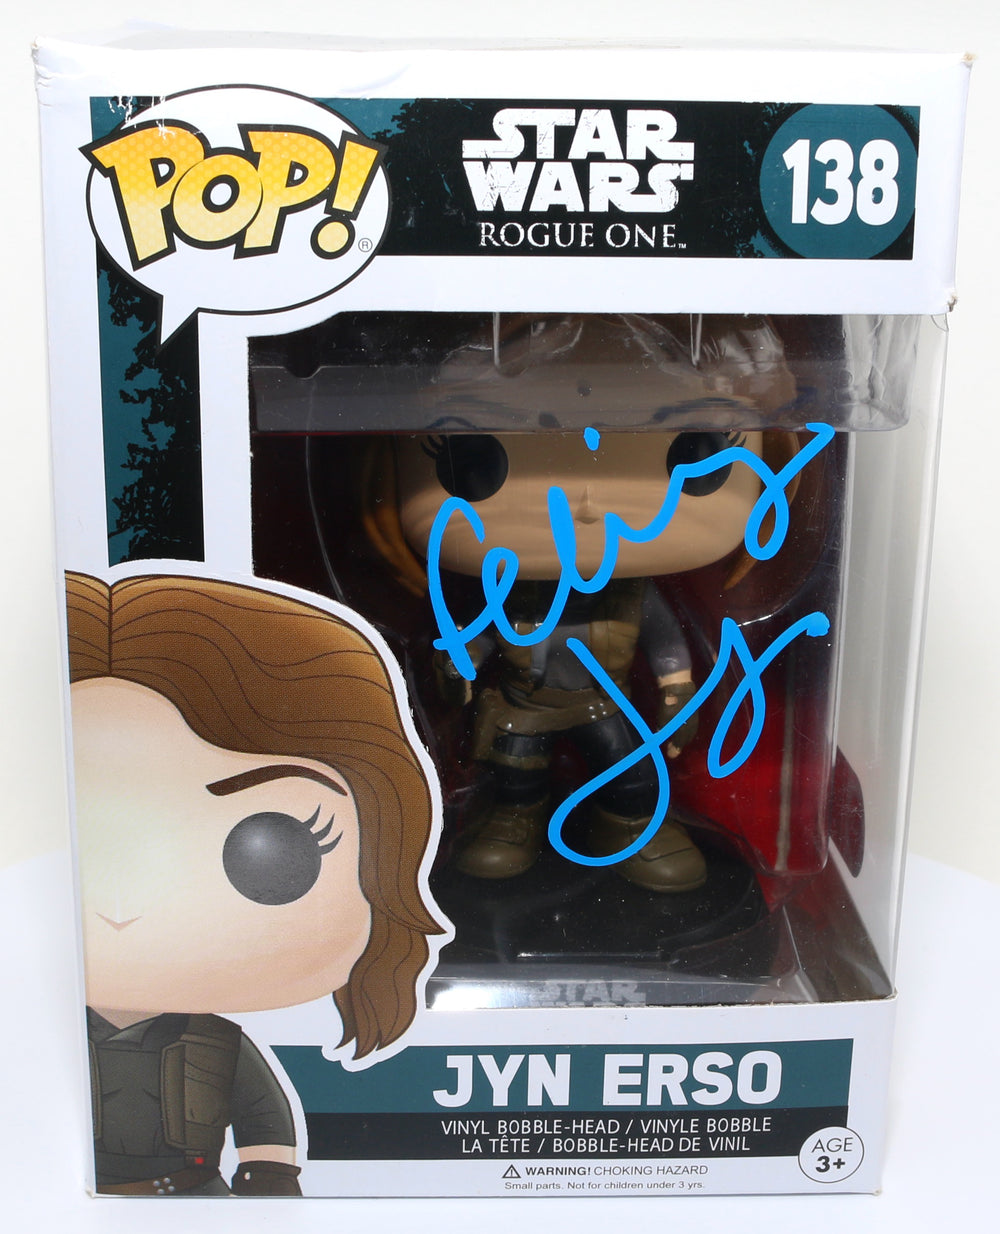 Felicity Jones as Jyn Erso in Rogue One: A Star Wars Story (SWAU Authenticated) Signed POP! Funko #138